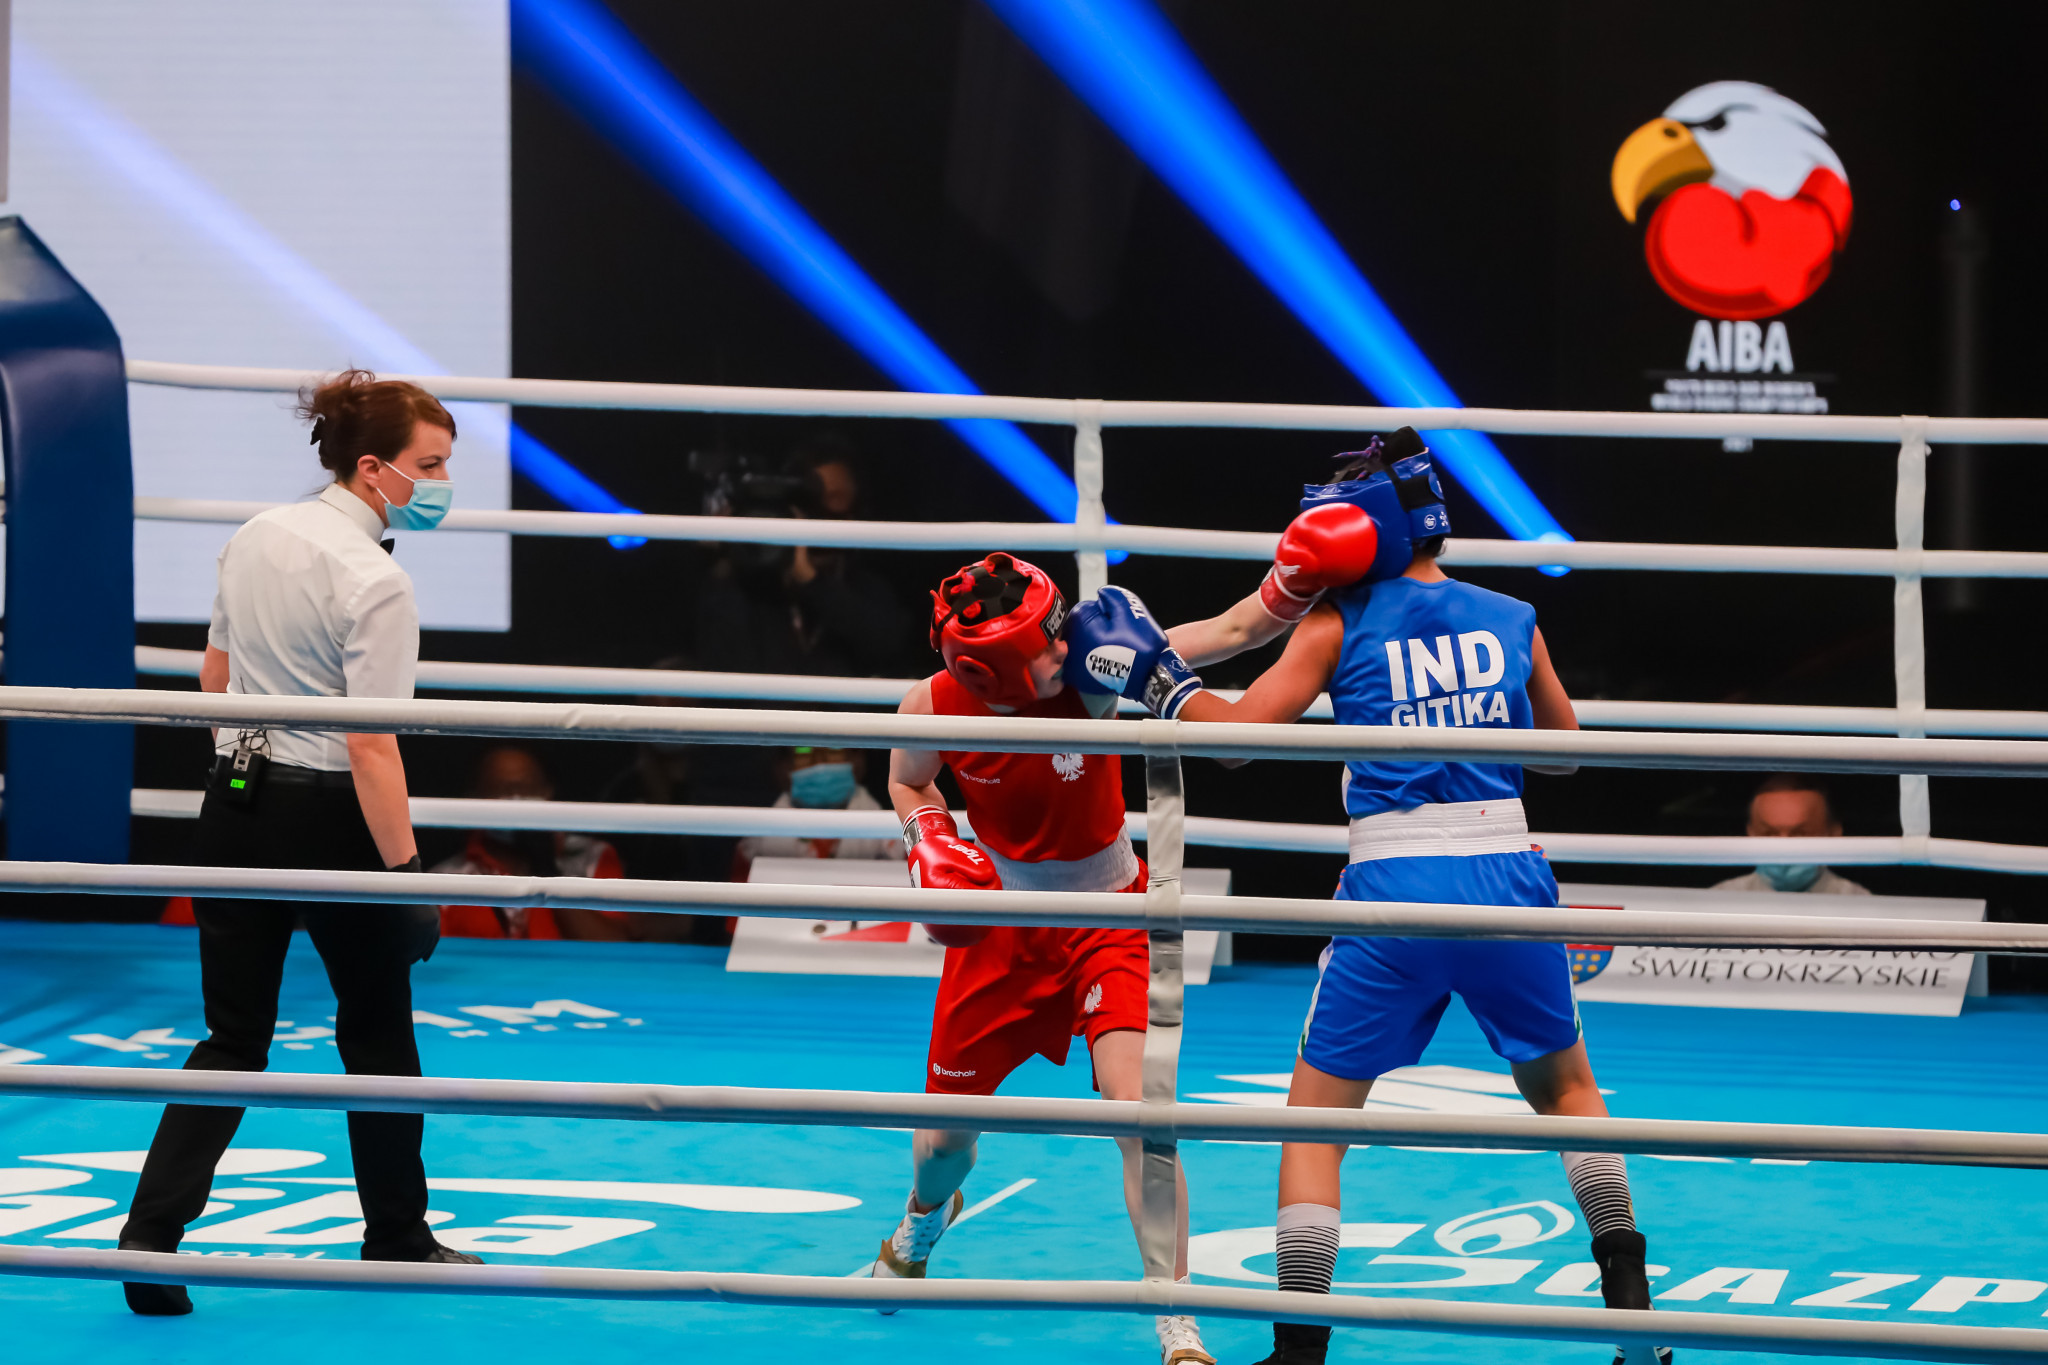 Gitika, in blue, was the first of seven Indian gold medallists on women's finals day at the AIBA Youth World Championships in Kielce ©AIBA